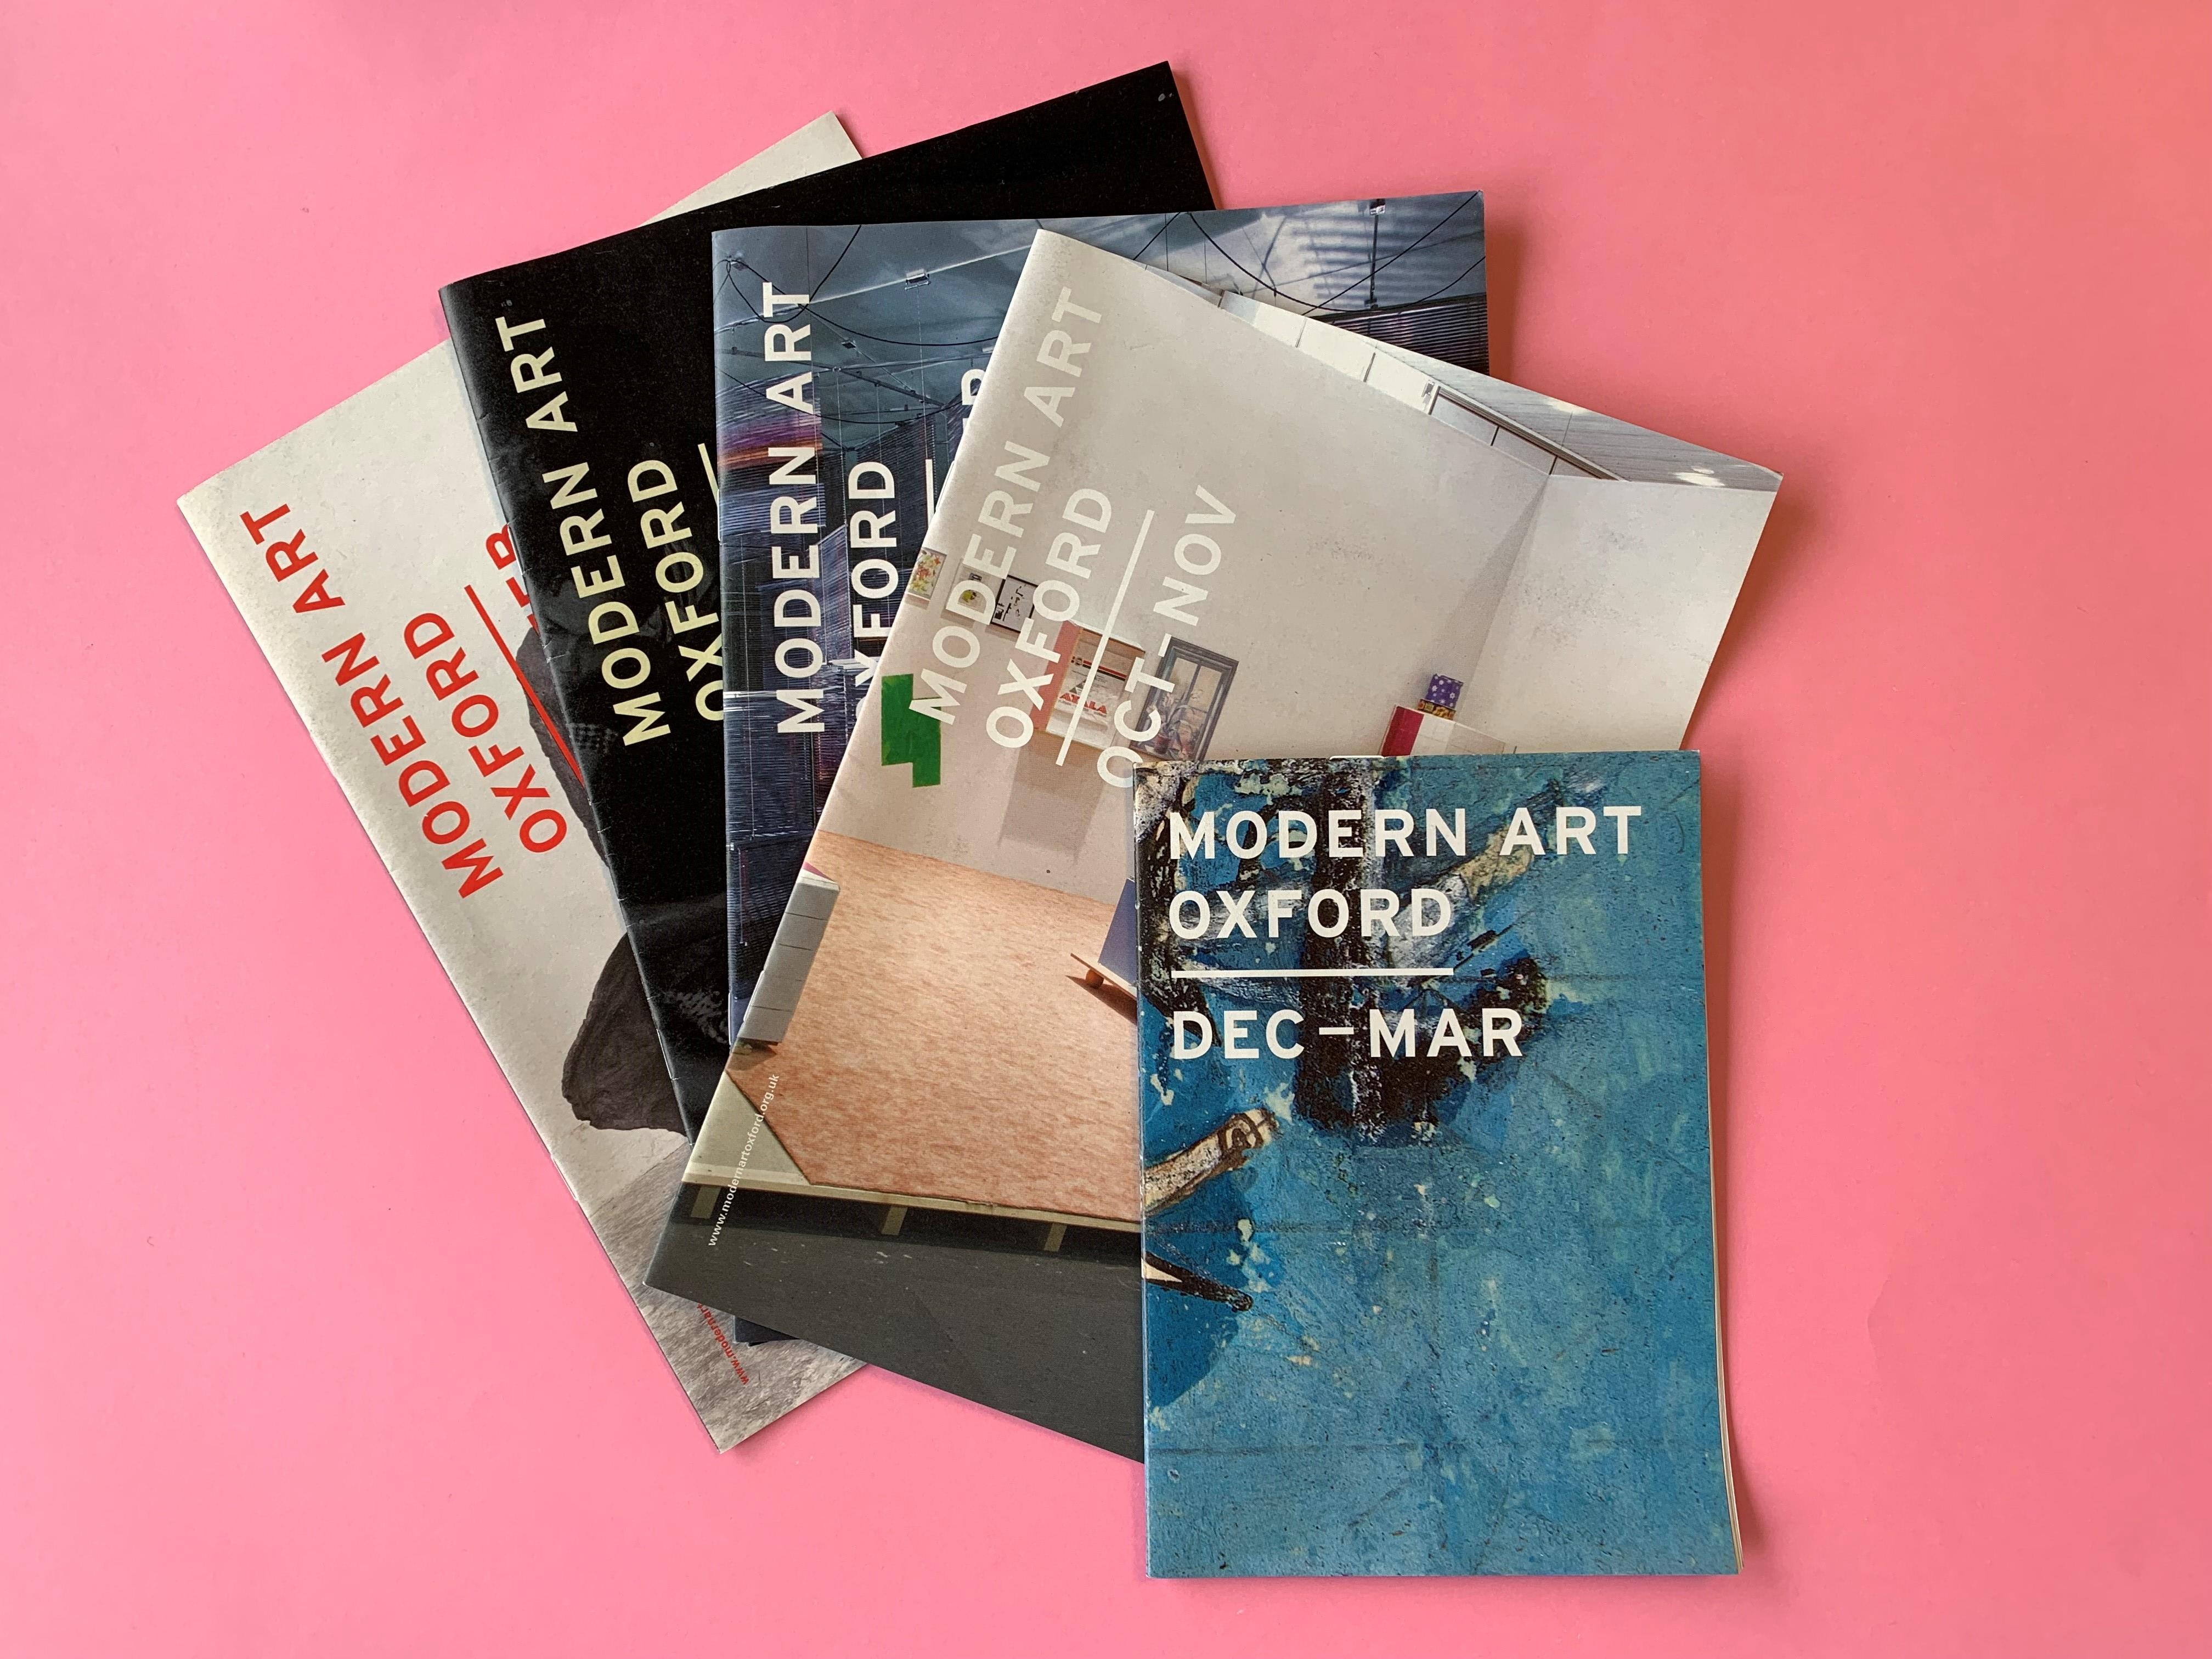 A selection of event programs printed for Modern Art Oxford